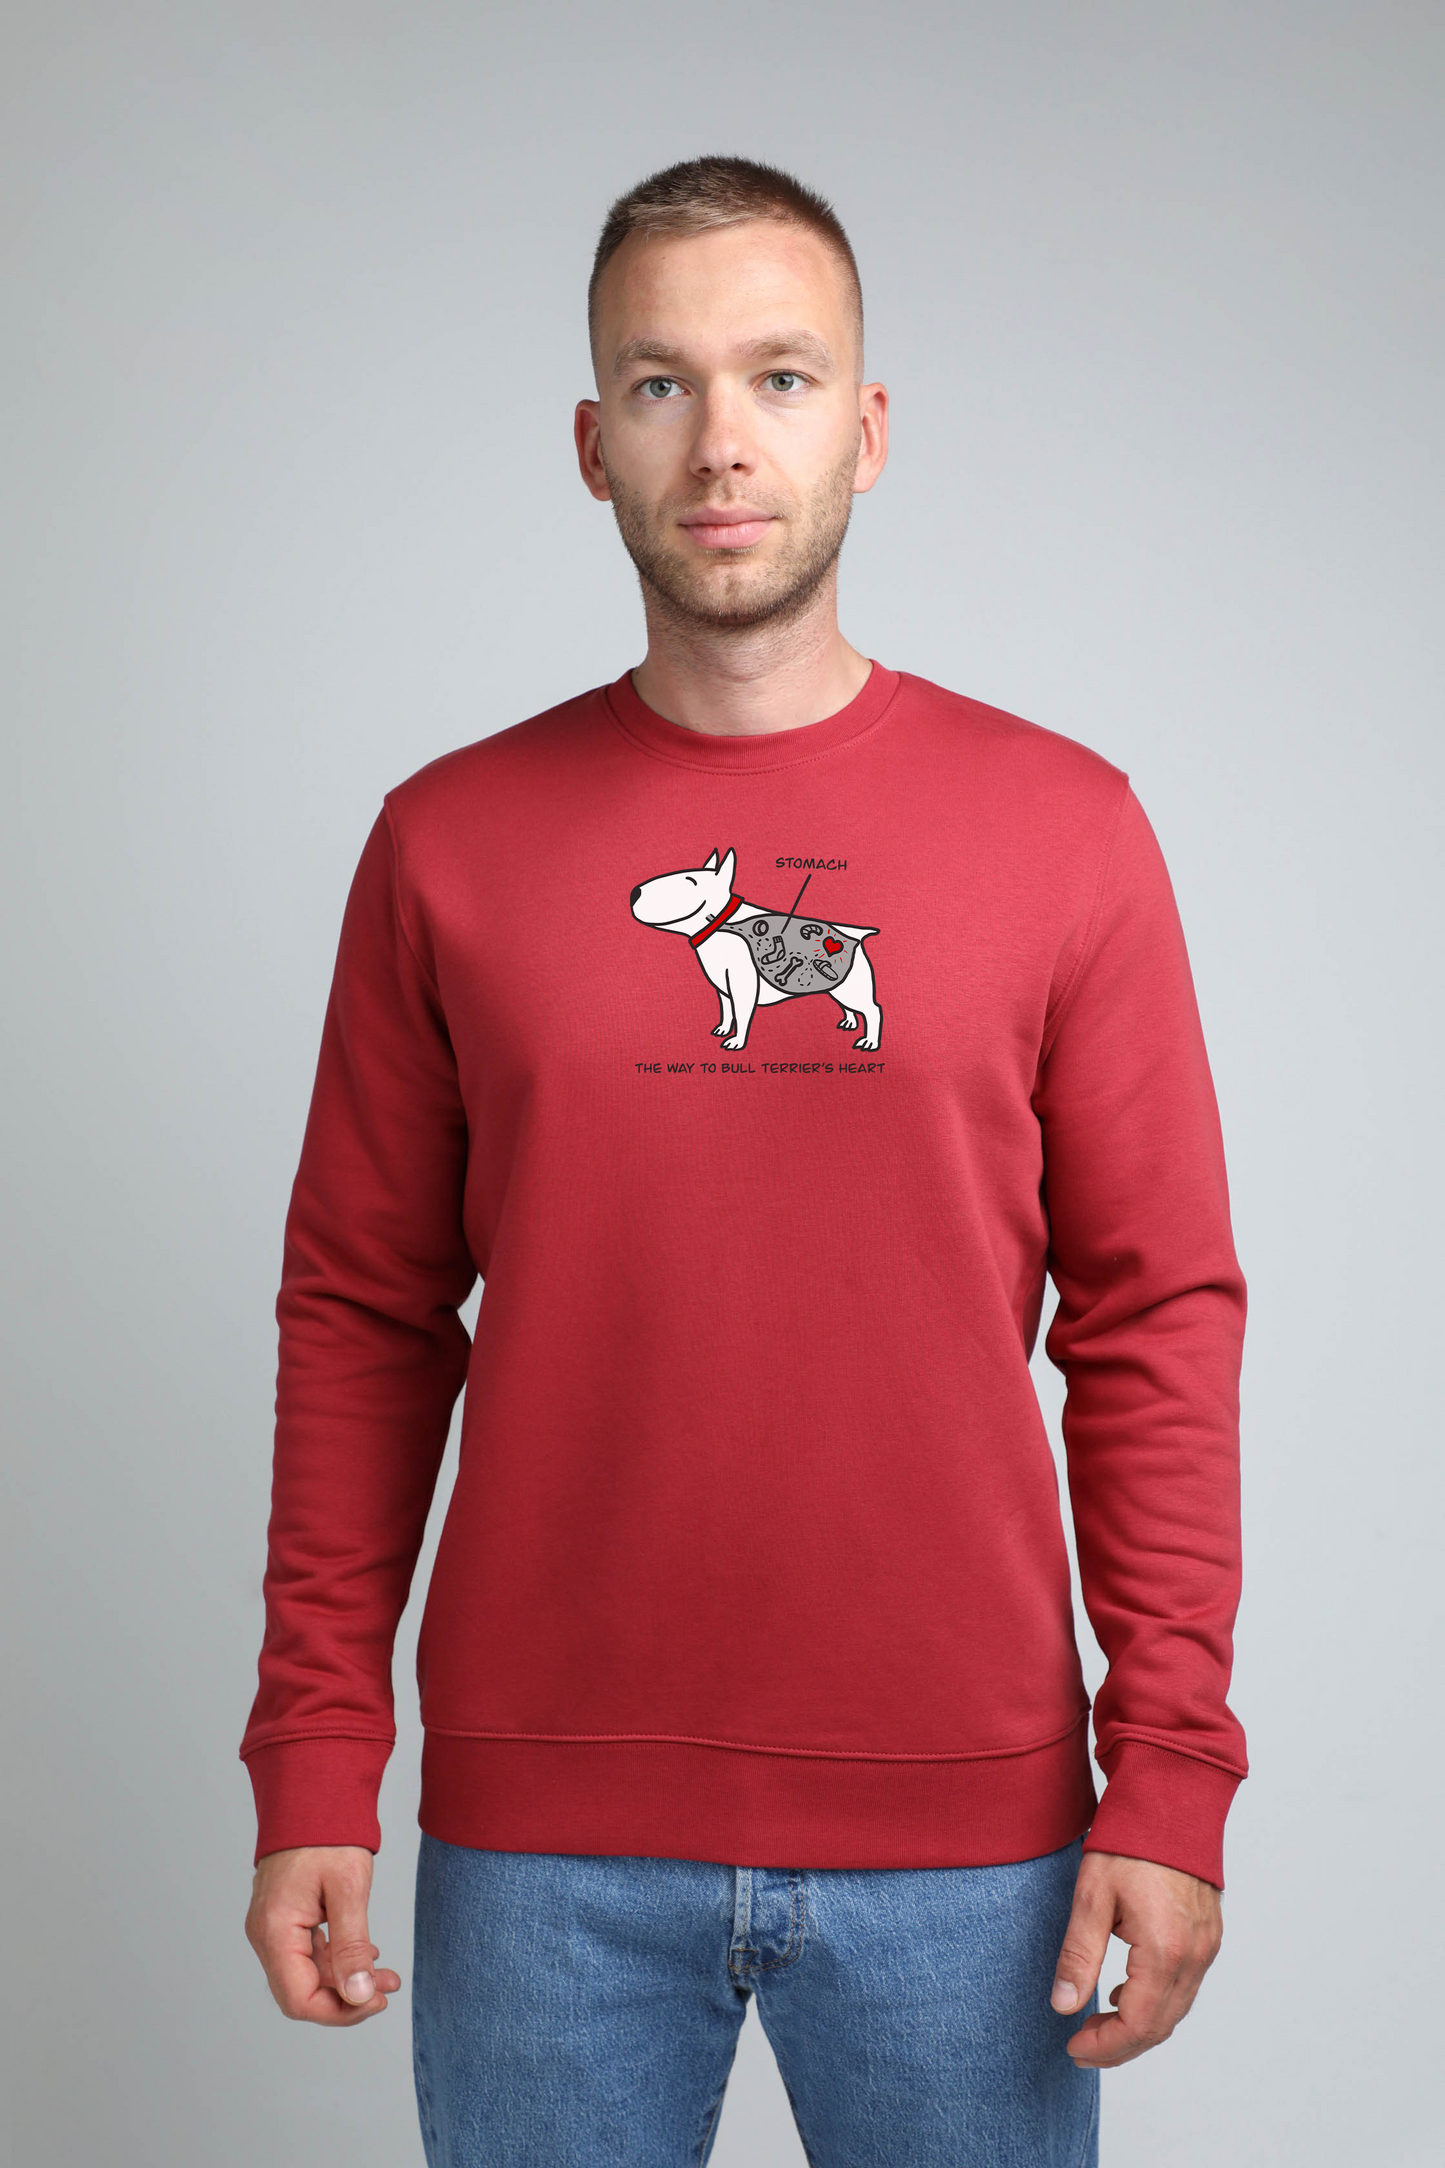 Hungry dog | Crew neck sweatshirt with dog. Regular fit | Unisex by My Wild Other